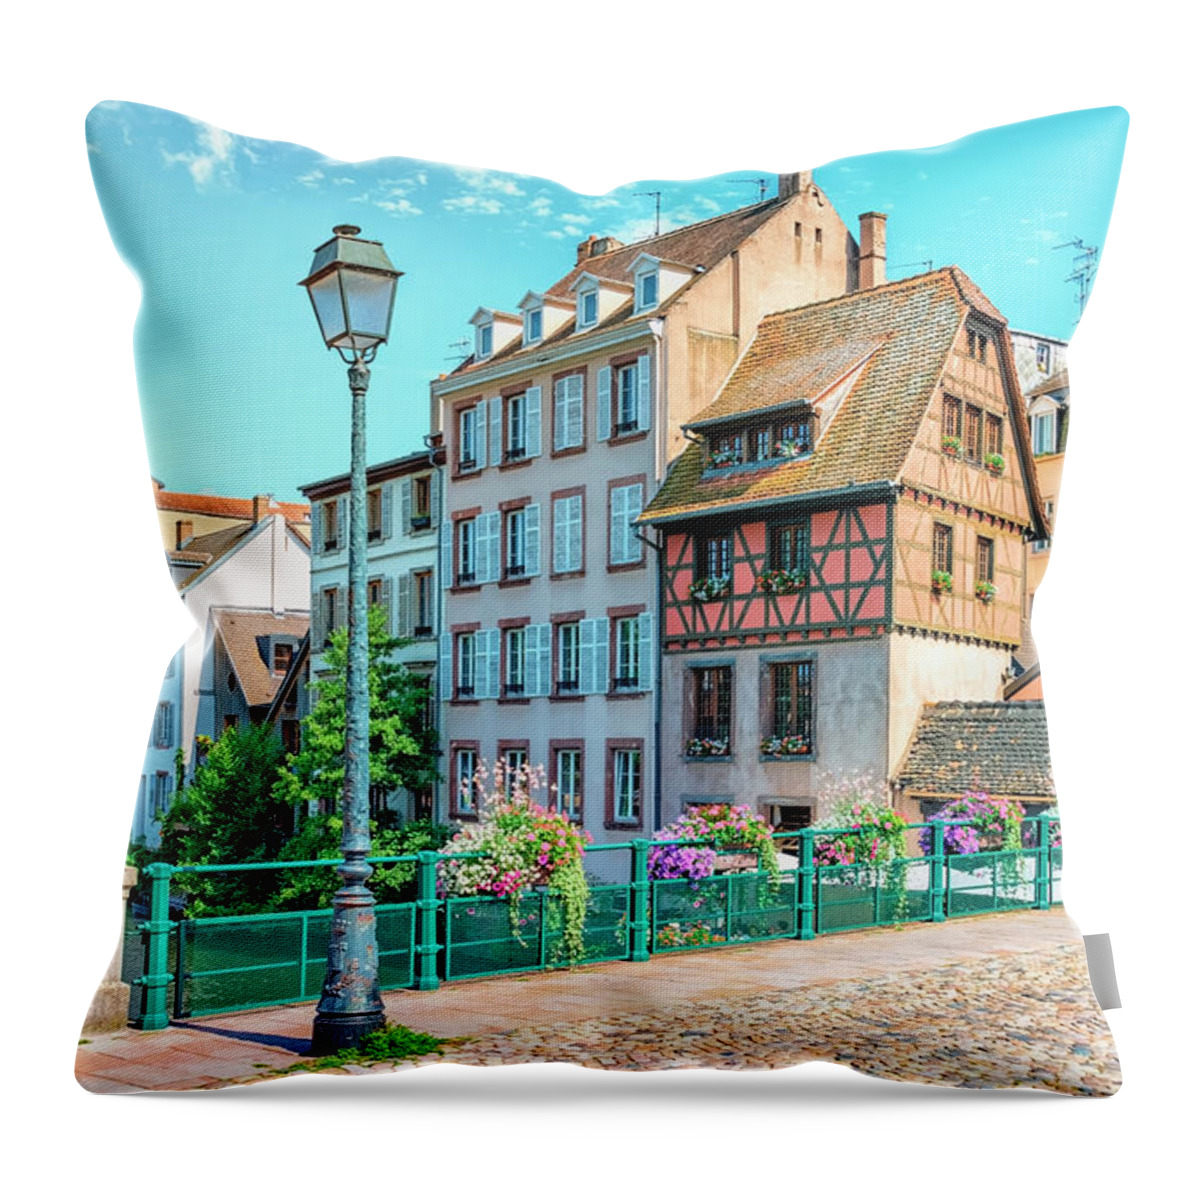 Strasbourg Throw Pillow featuring the photograph Colorful Strasbourg by Manjik Pictures